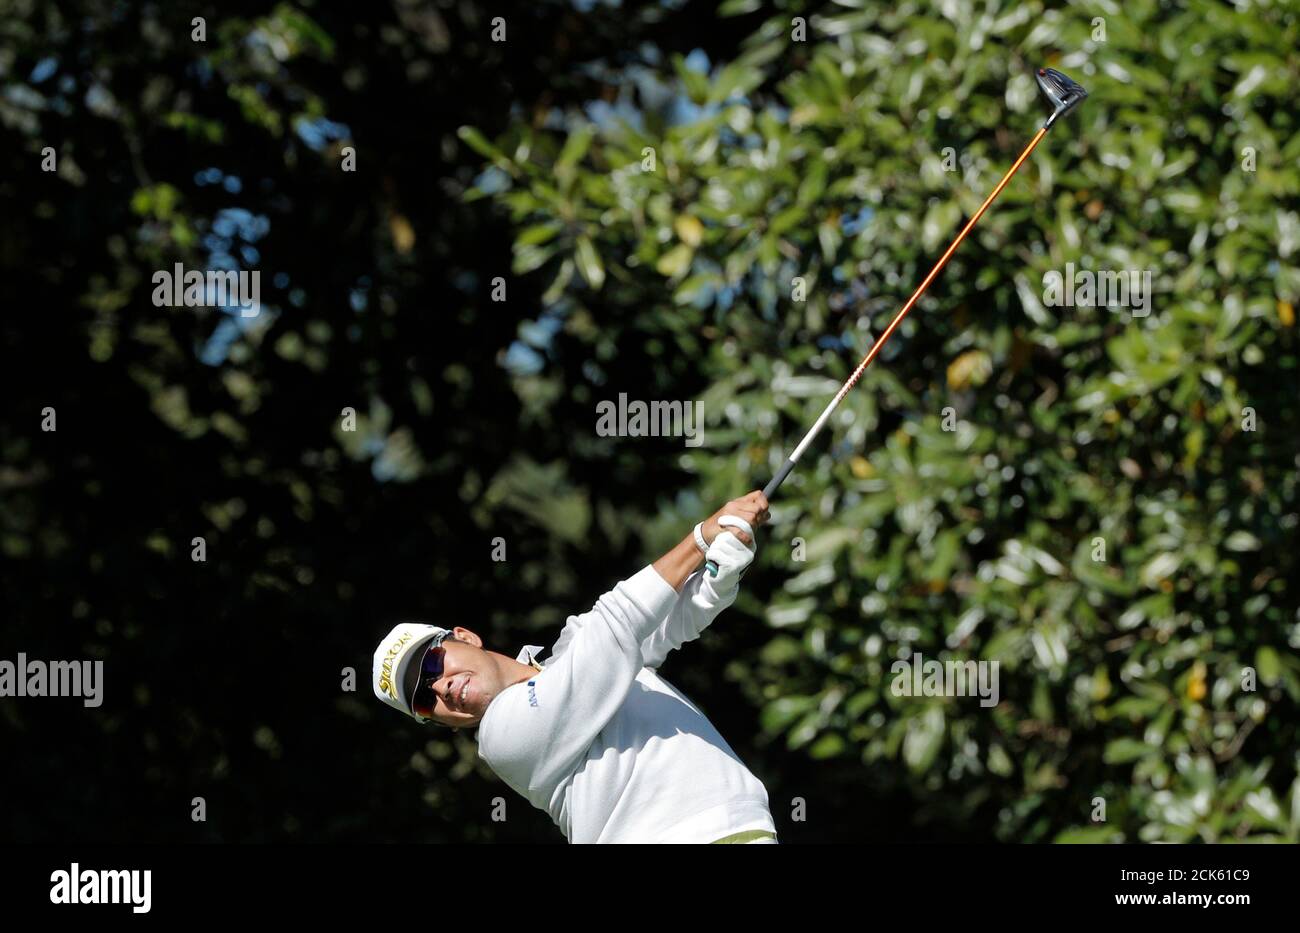 Hideki Matsuyama of Japan hits off the 11th tee in second round play during the 2017 Masters golf tournament at Augusta National Golf Club in Augusta, Georgia, U.S., April 7, 2017. REUTERS/Mike Segar Foto de stock